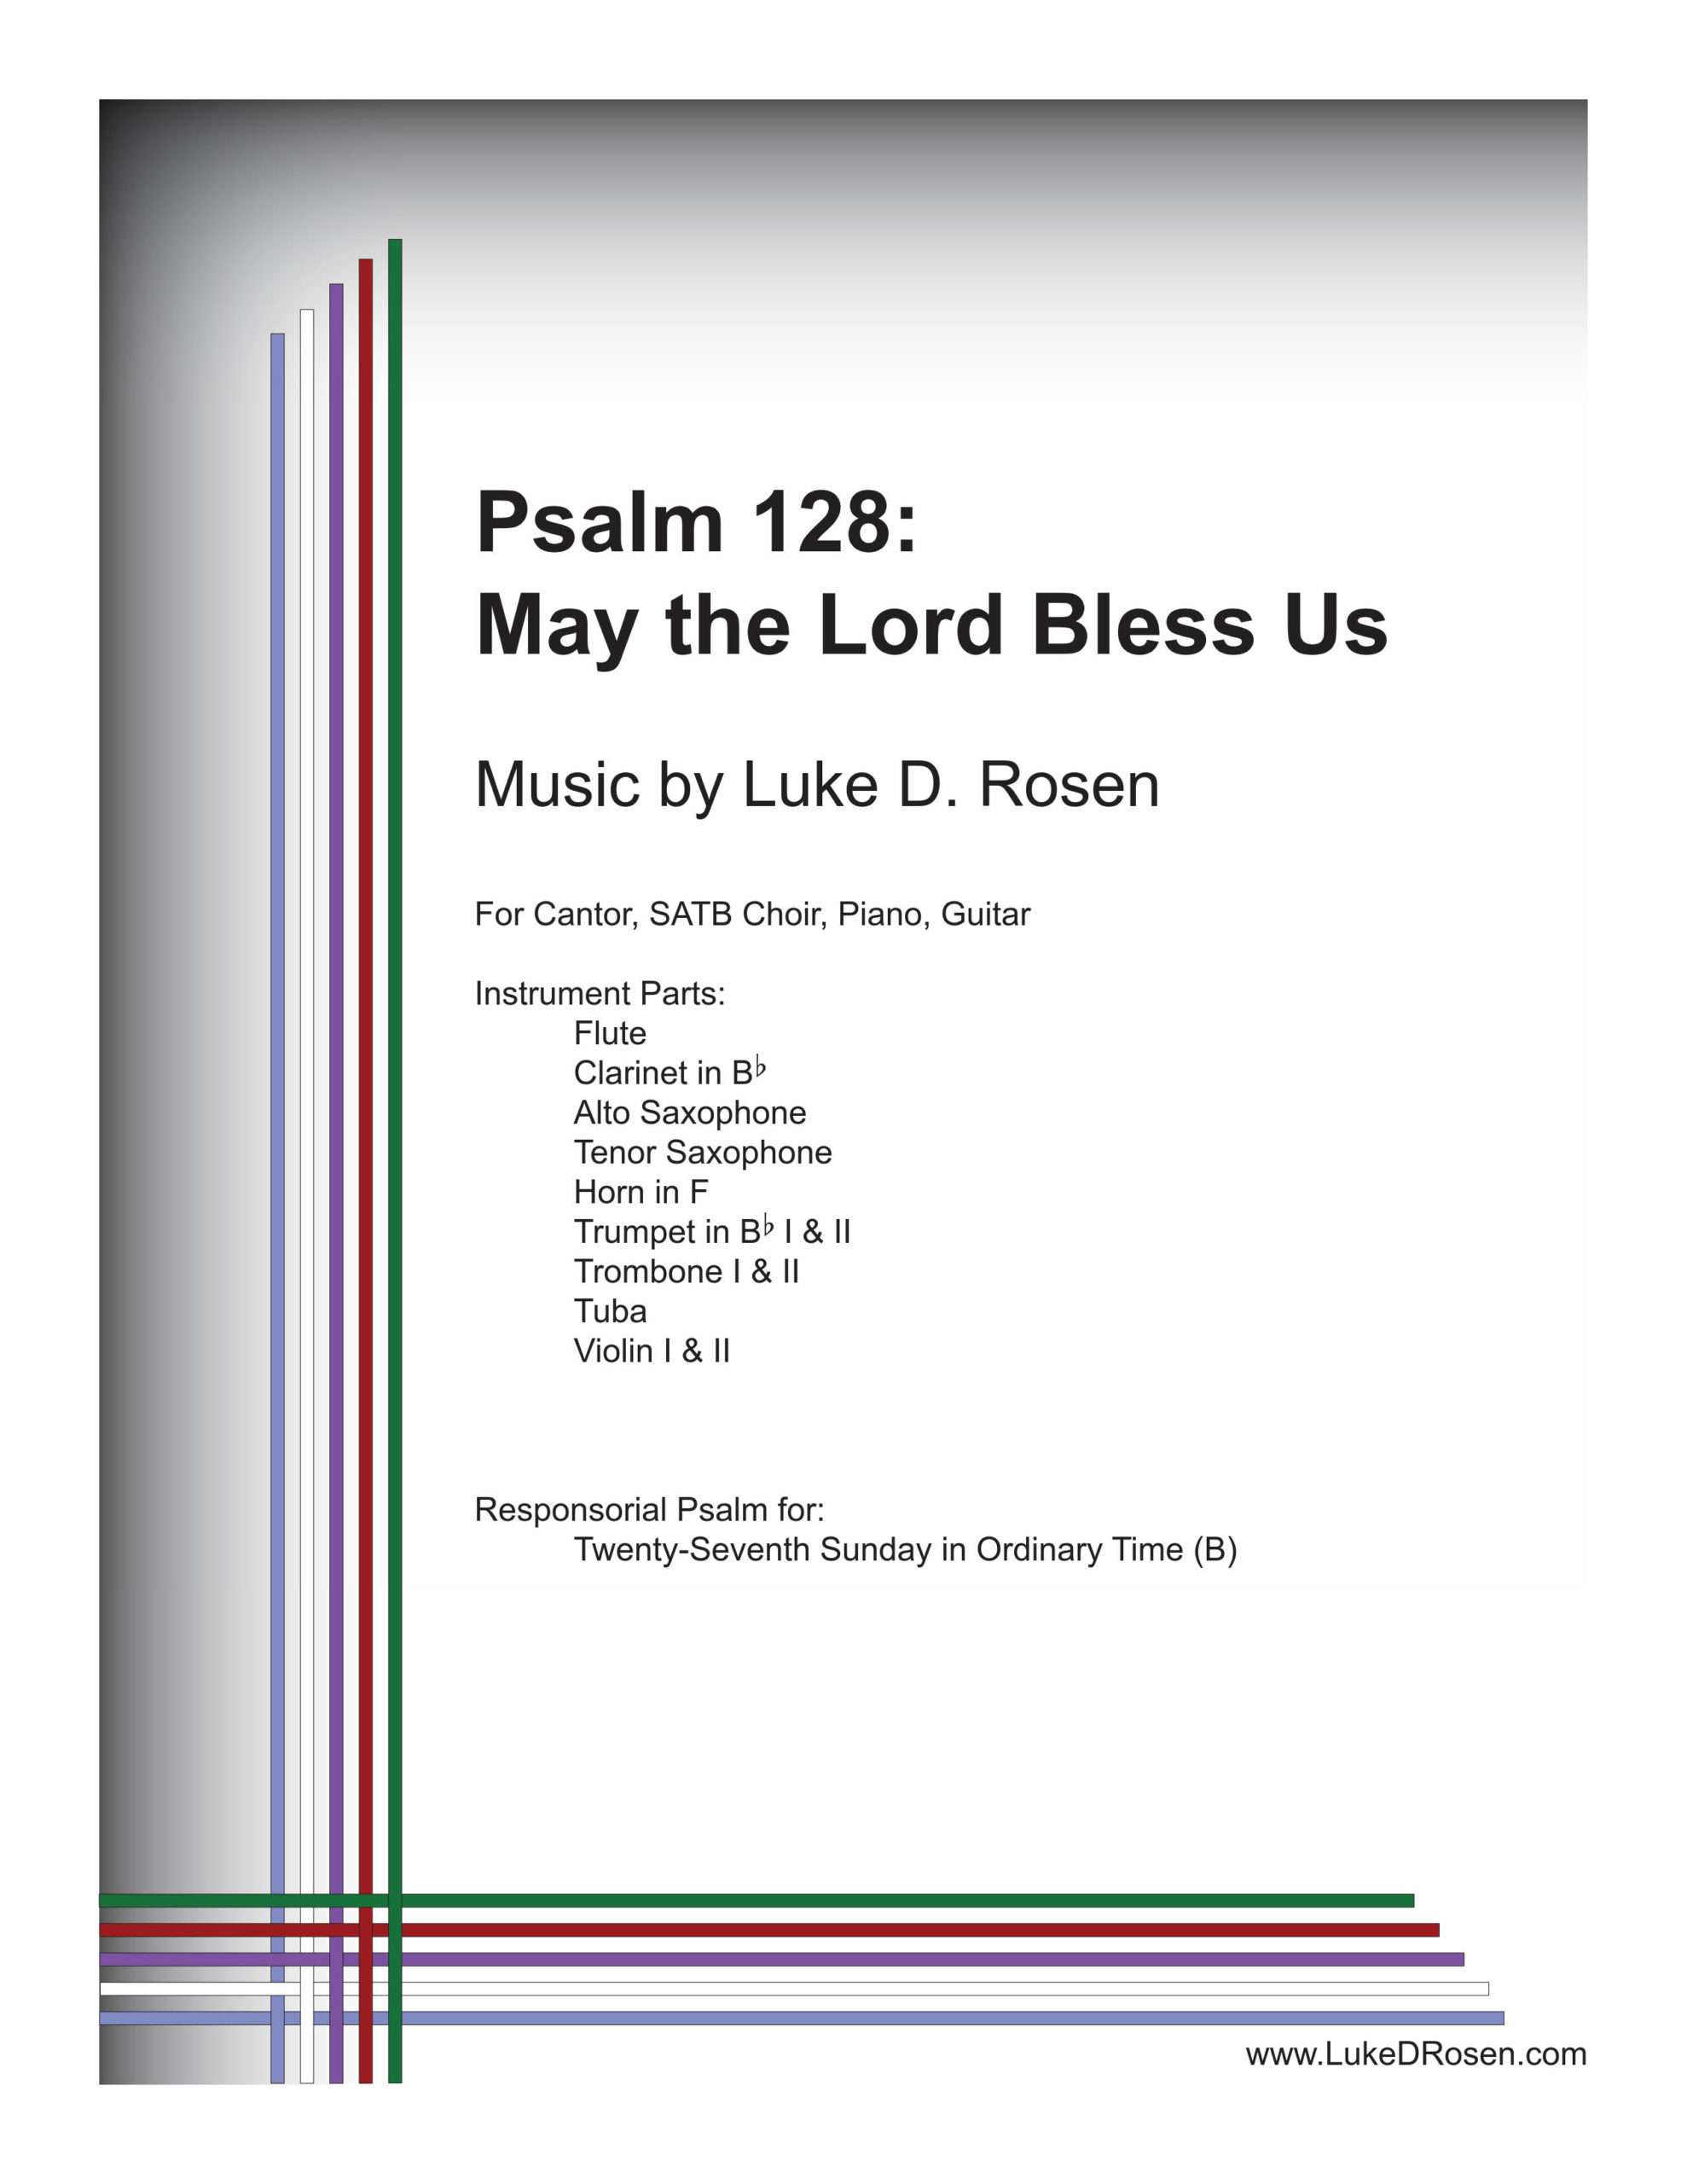 Psalm 128 – May the Lord Bless Us (Rosen)